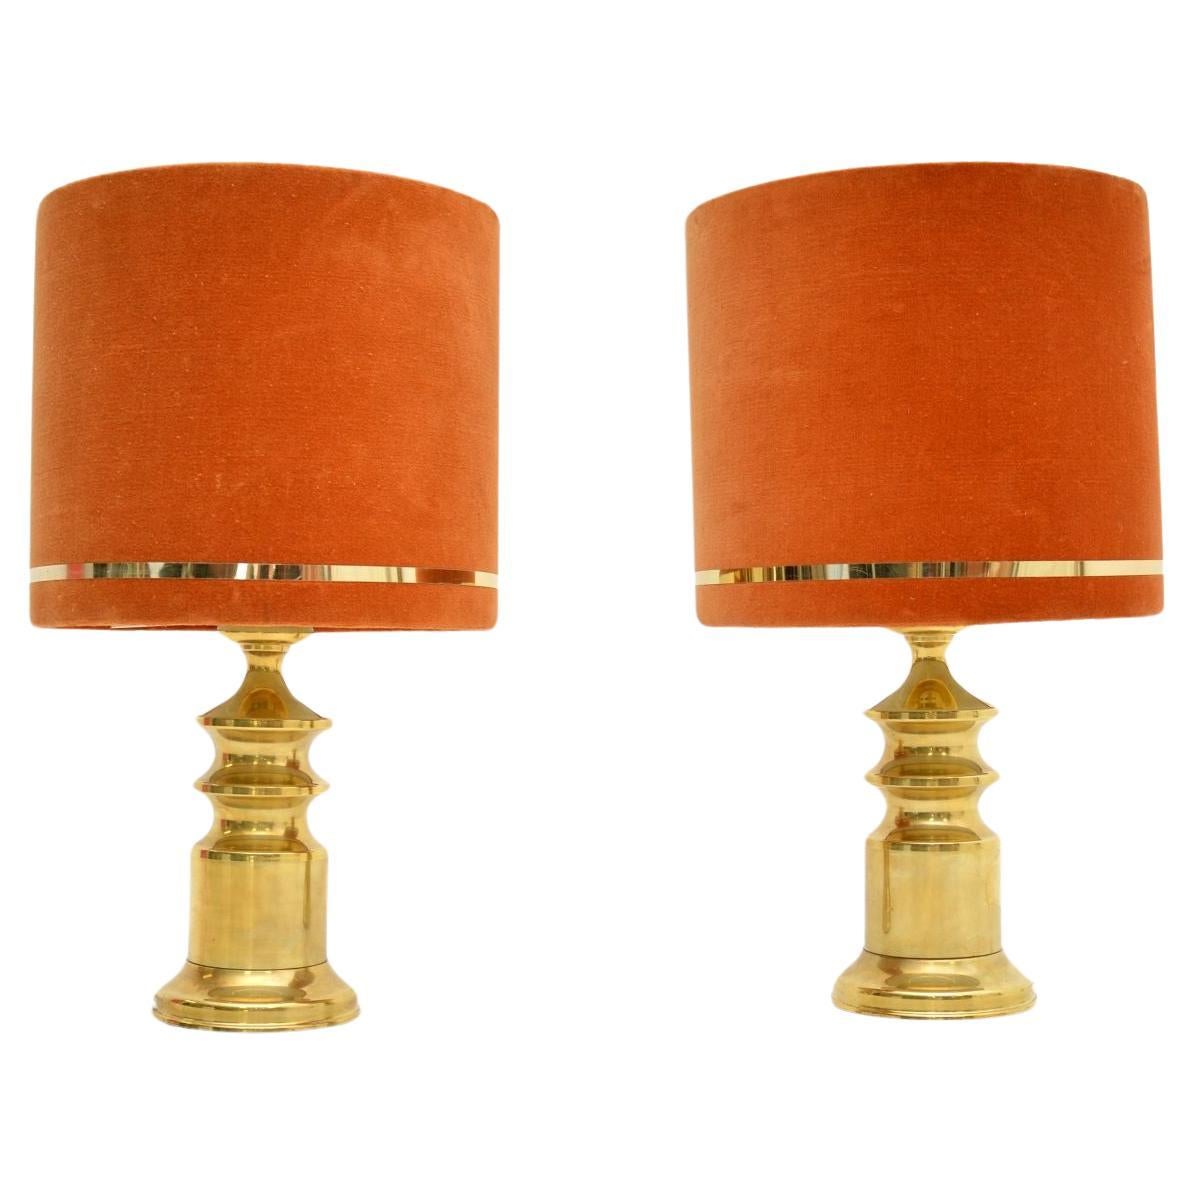 Pair of Vintage Brass Table Lamps with Velvet Shades